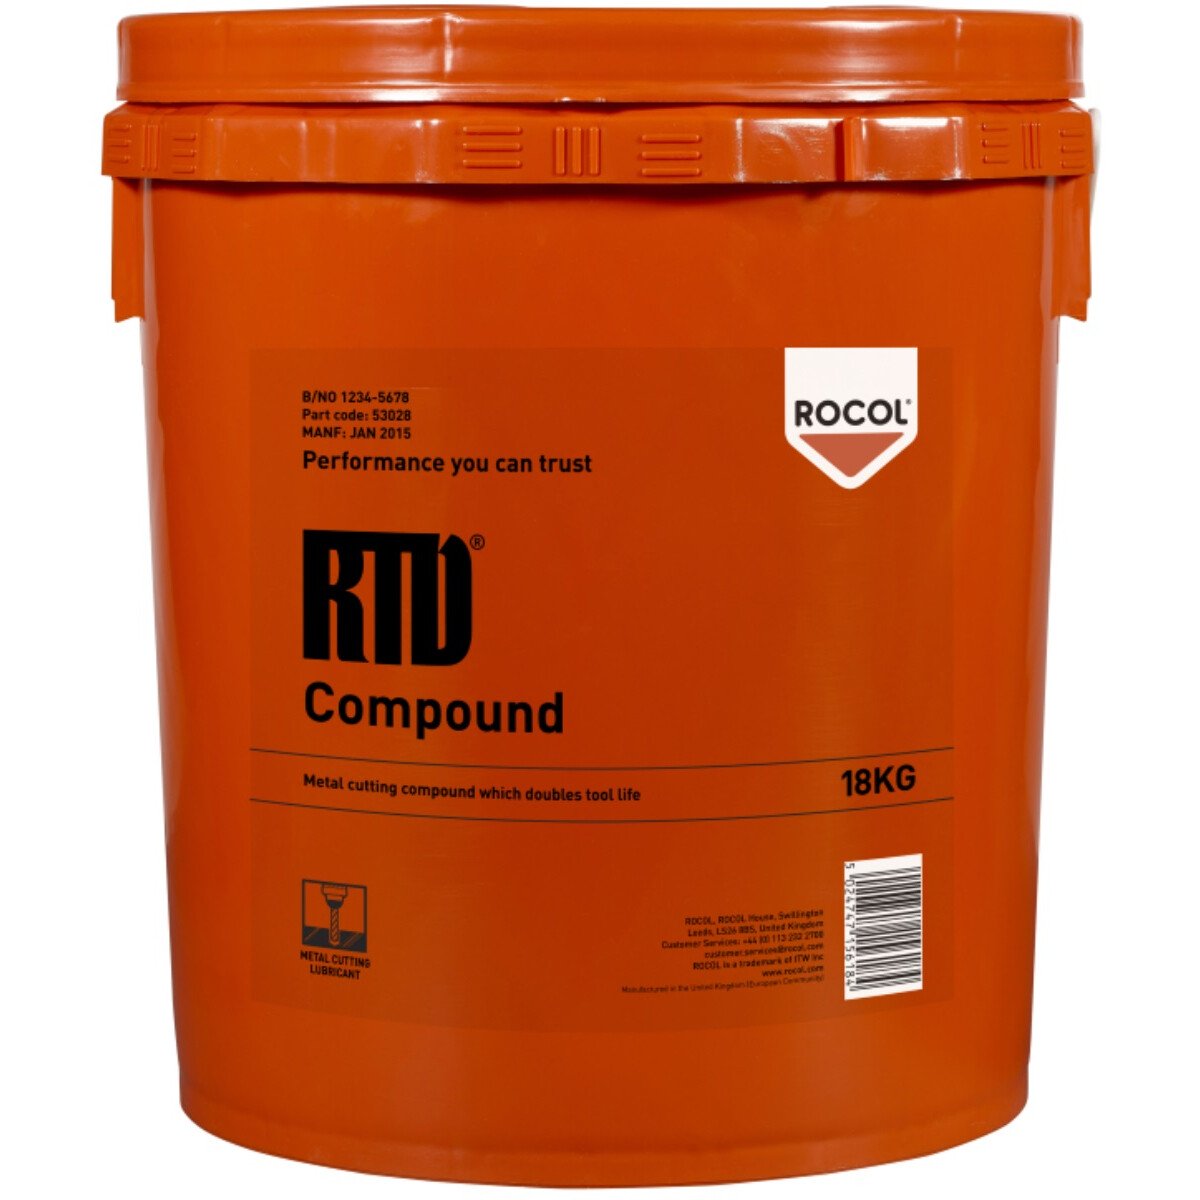 Rocol 53028 RTD Compound - Metal Cutting Compound that Doubles Tool Life 18kg